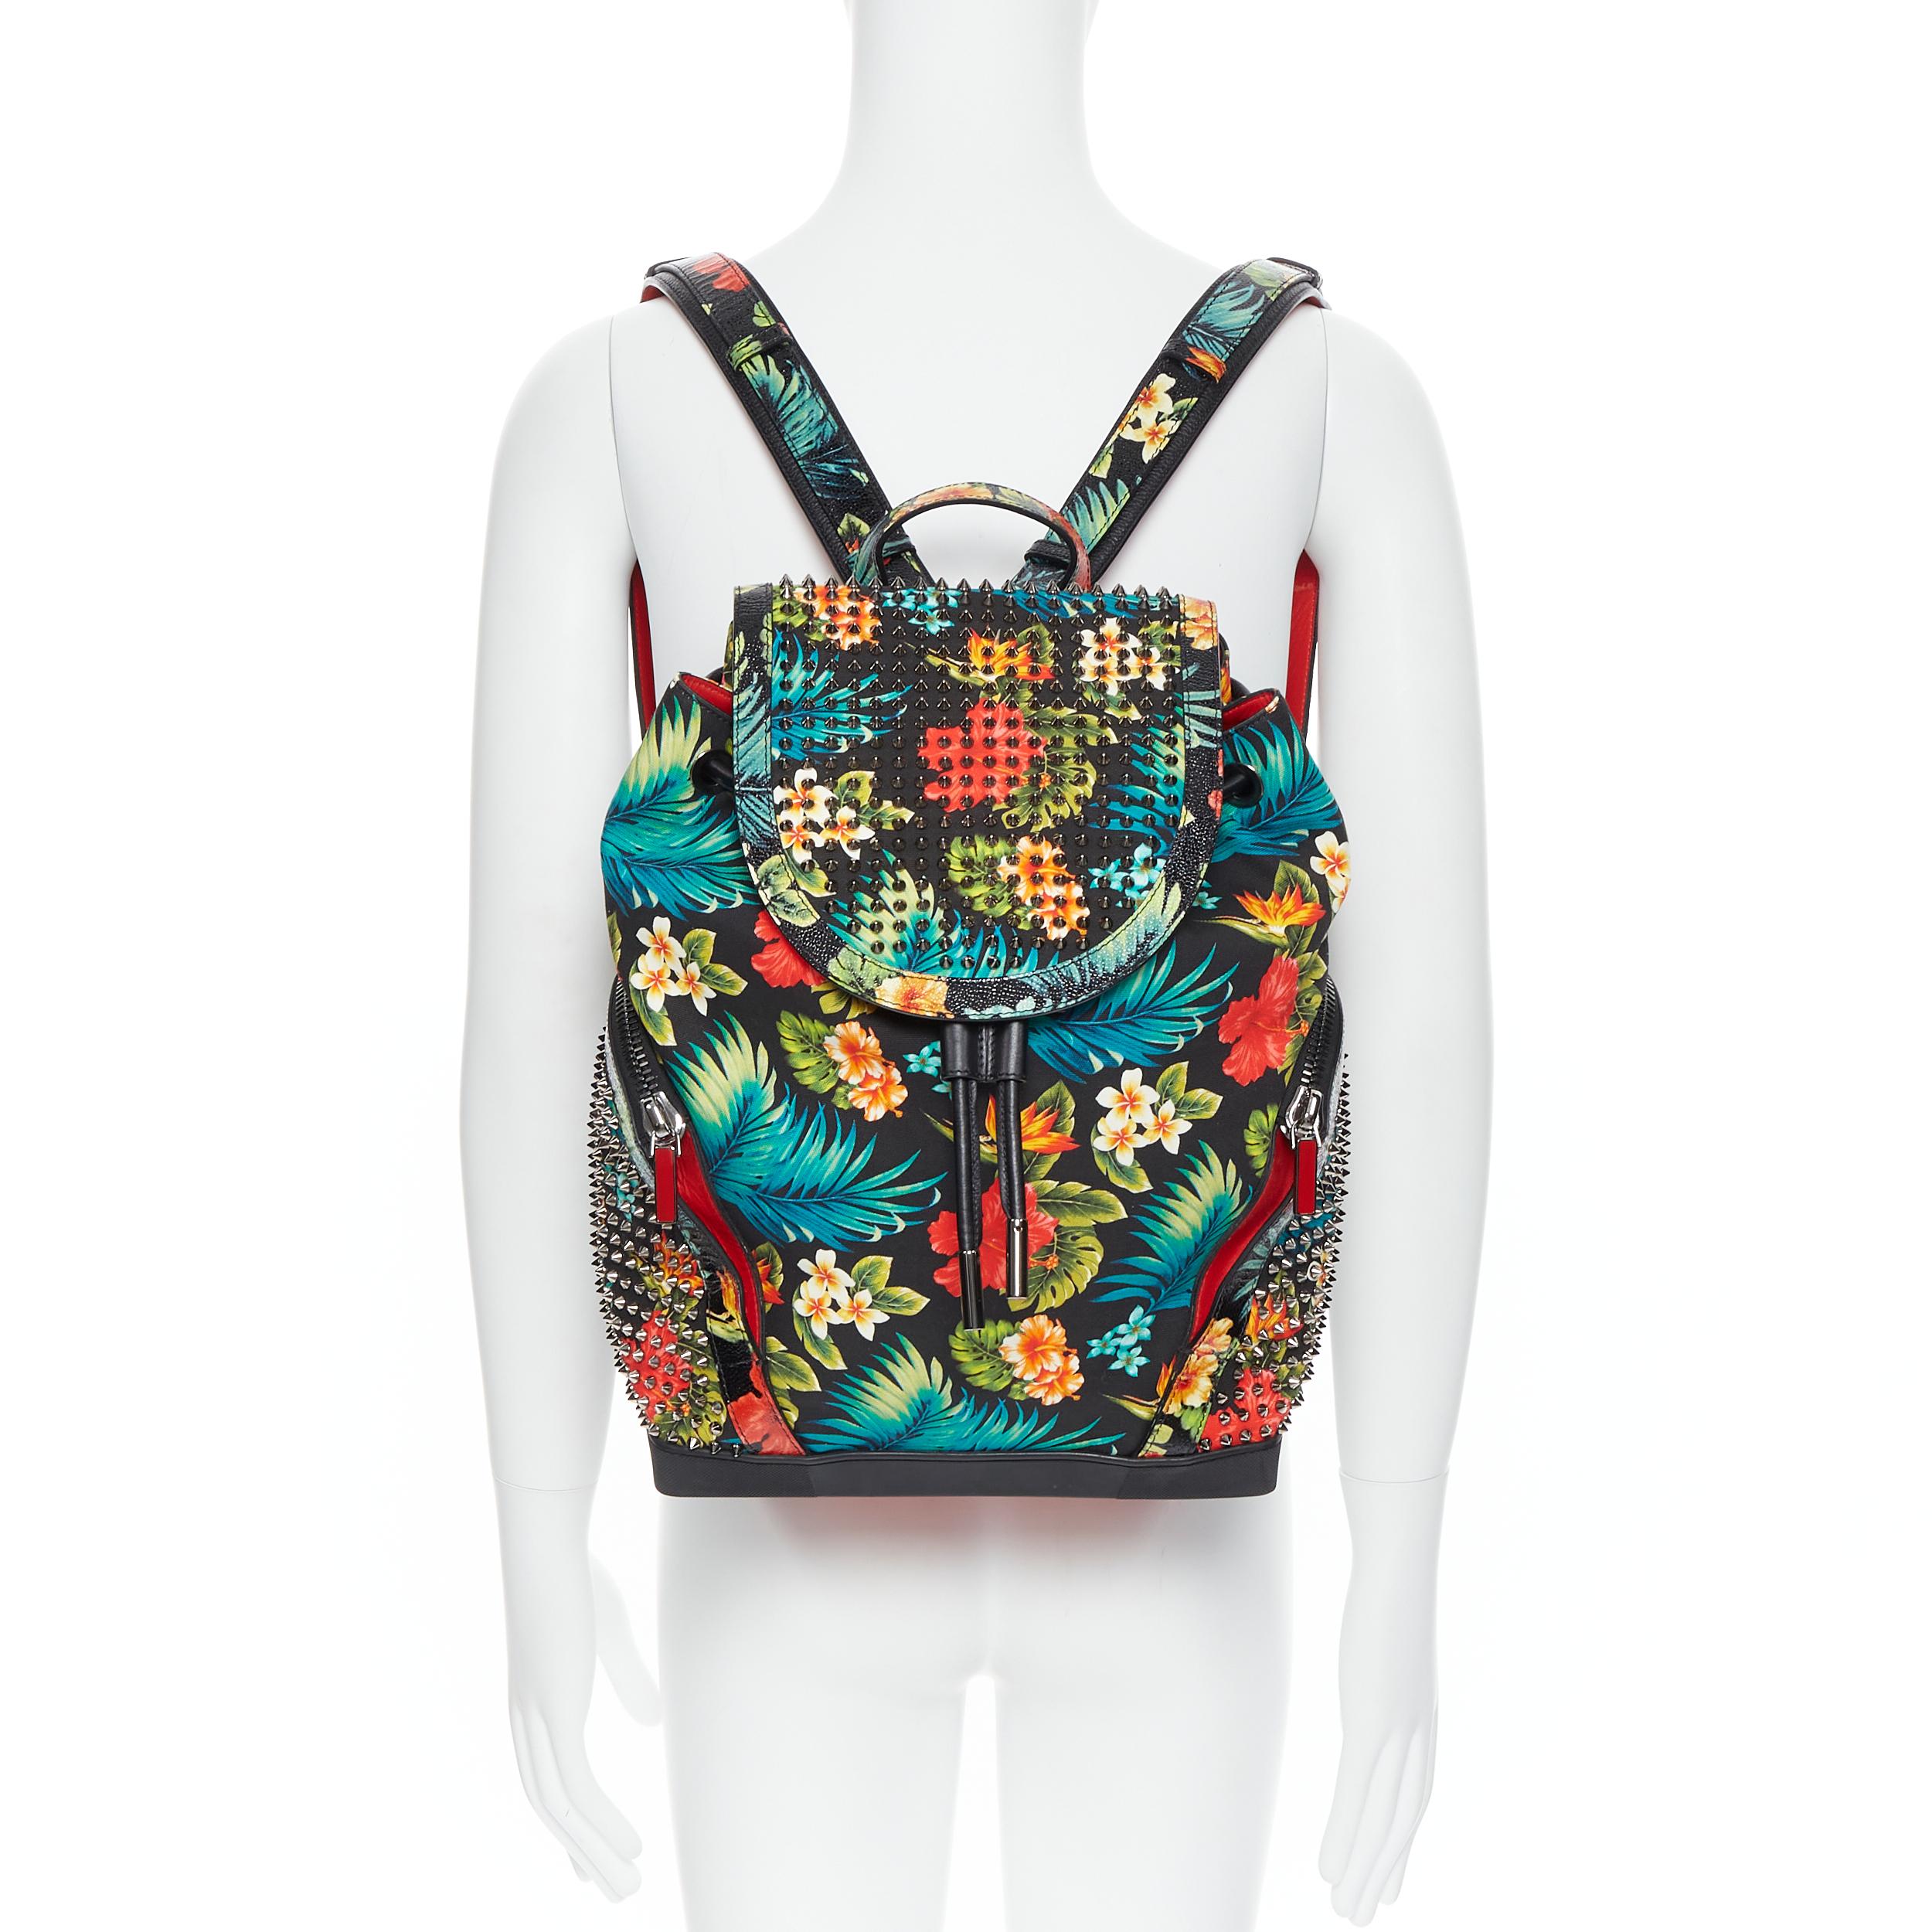 CHRISTIAN LOUBOUTIN Explorafunk tropical floral canvas spike stud backpack bag 
Reference: TGAS/B00740 
Brand: Christian Louboutin 
Designer: Christian Louboutin 
Model: Explorafunk backpack 
Material: Fabric 
Color: Green 
Pattern: Floral 
Closure: